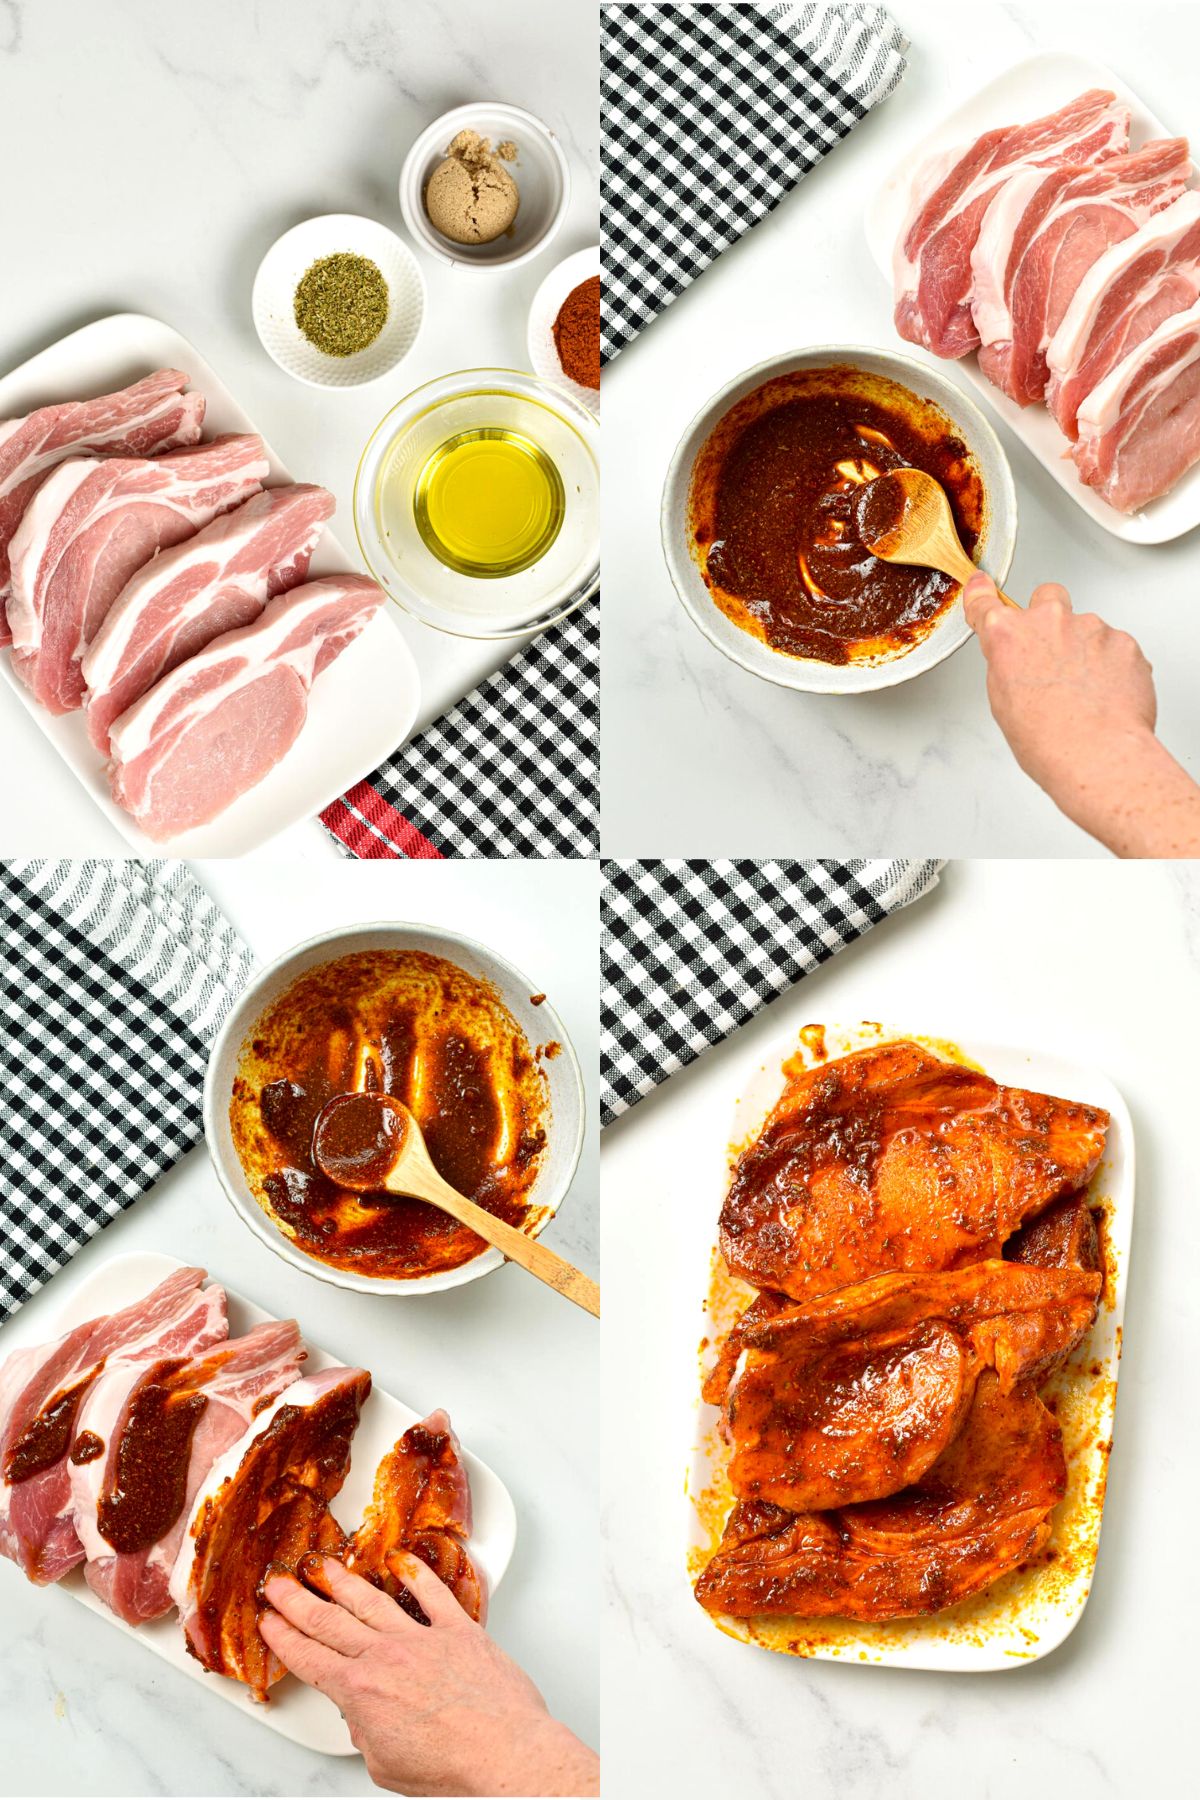 How to make 4 ingredient Oven Baked Pork Chops